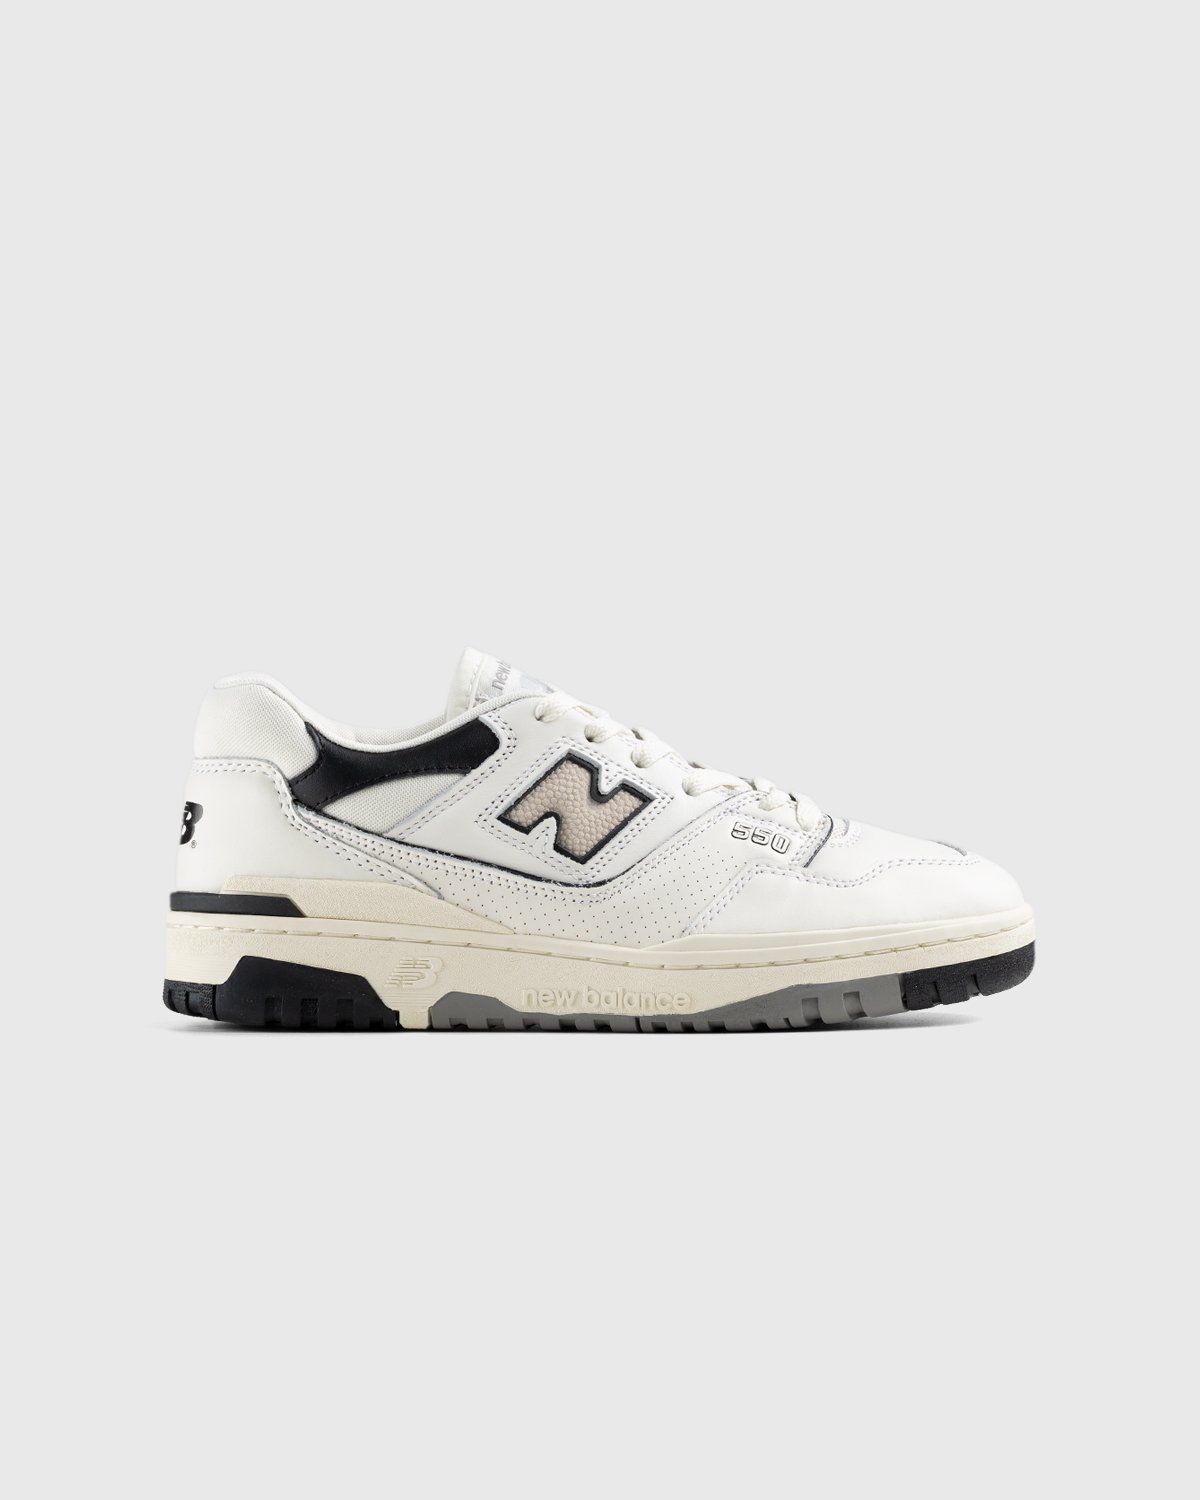 New Balance – BB550LWT Sea Salt - Low Top Sneakers - White - Image 1